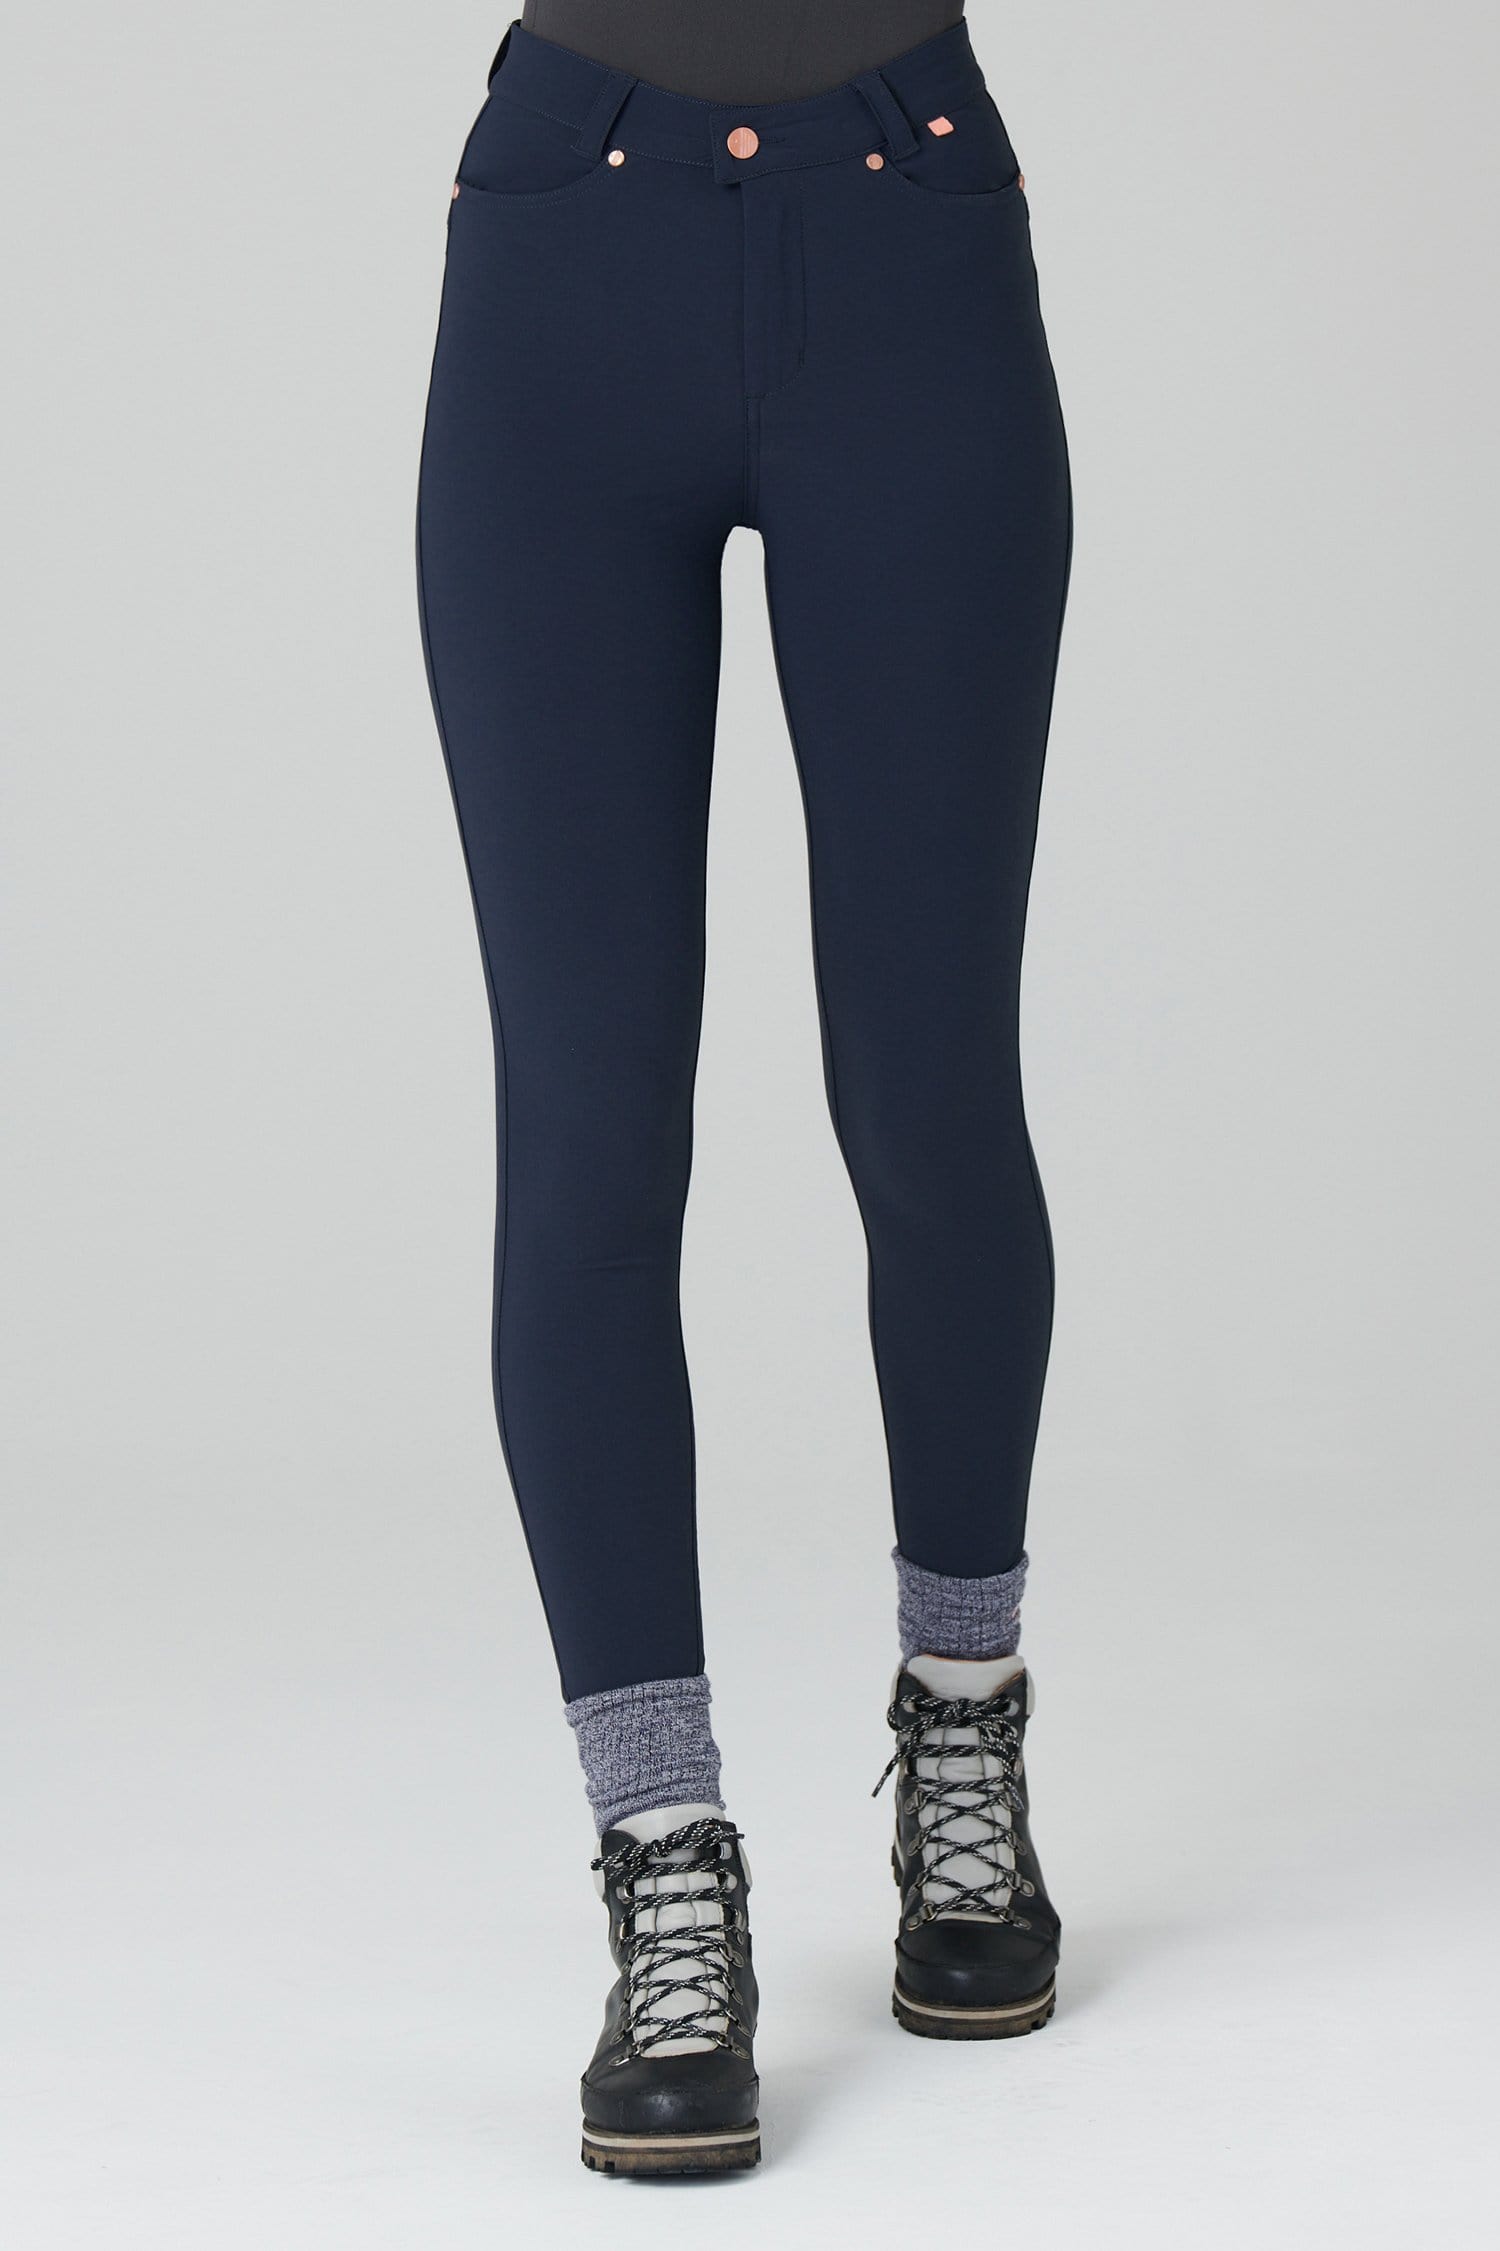 Thermal Skinny Outdoor Trousers - Deep Navy - 26r / Uk8 - Womens - Acai Outdoorwear